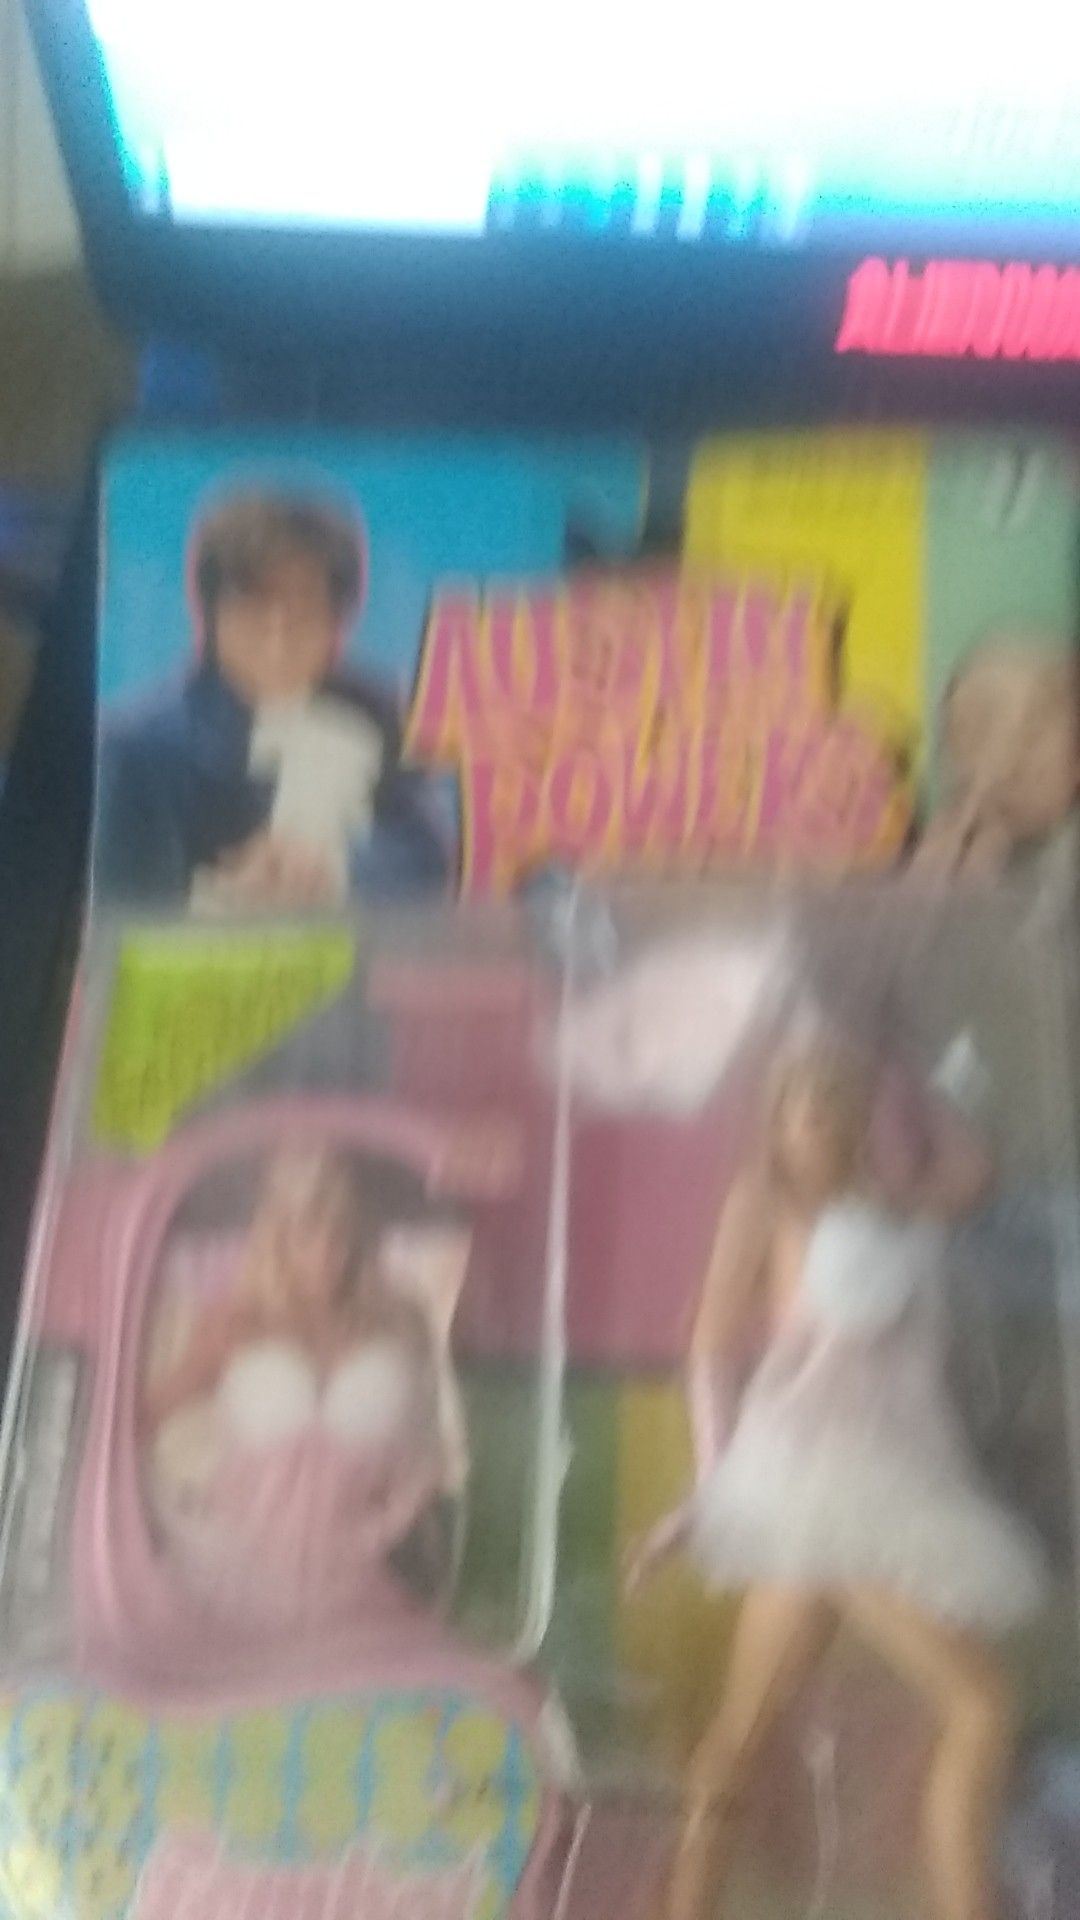 Fembot action figure from Austin Powers